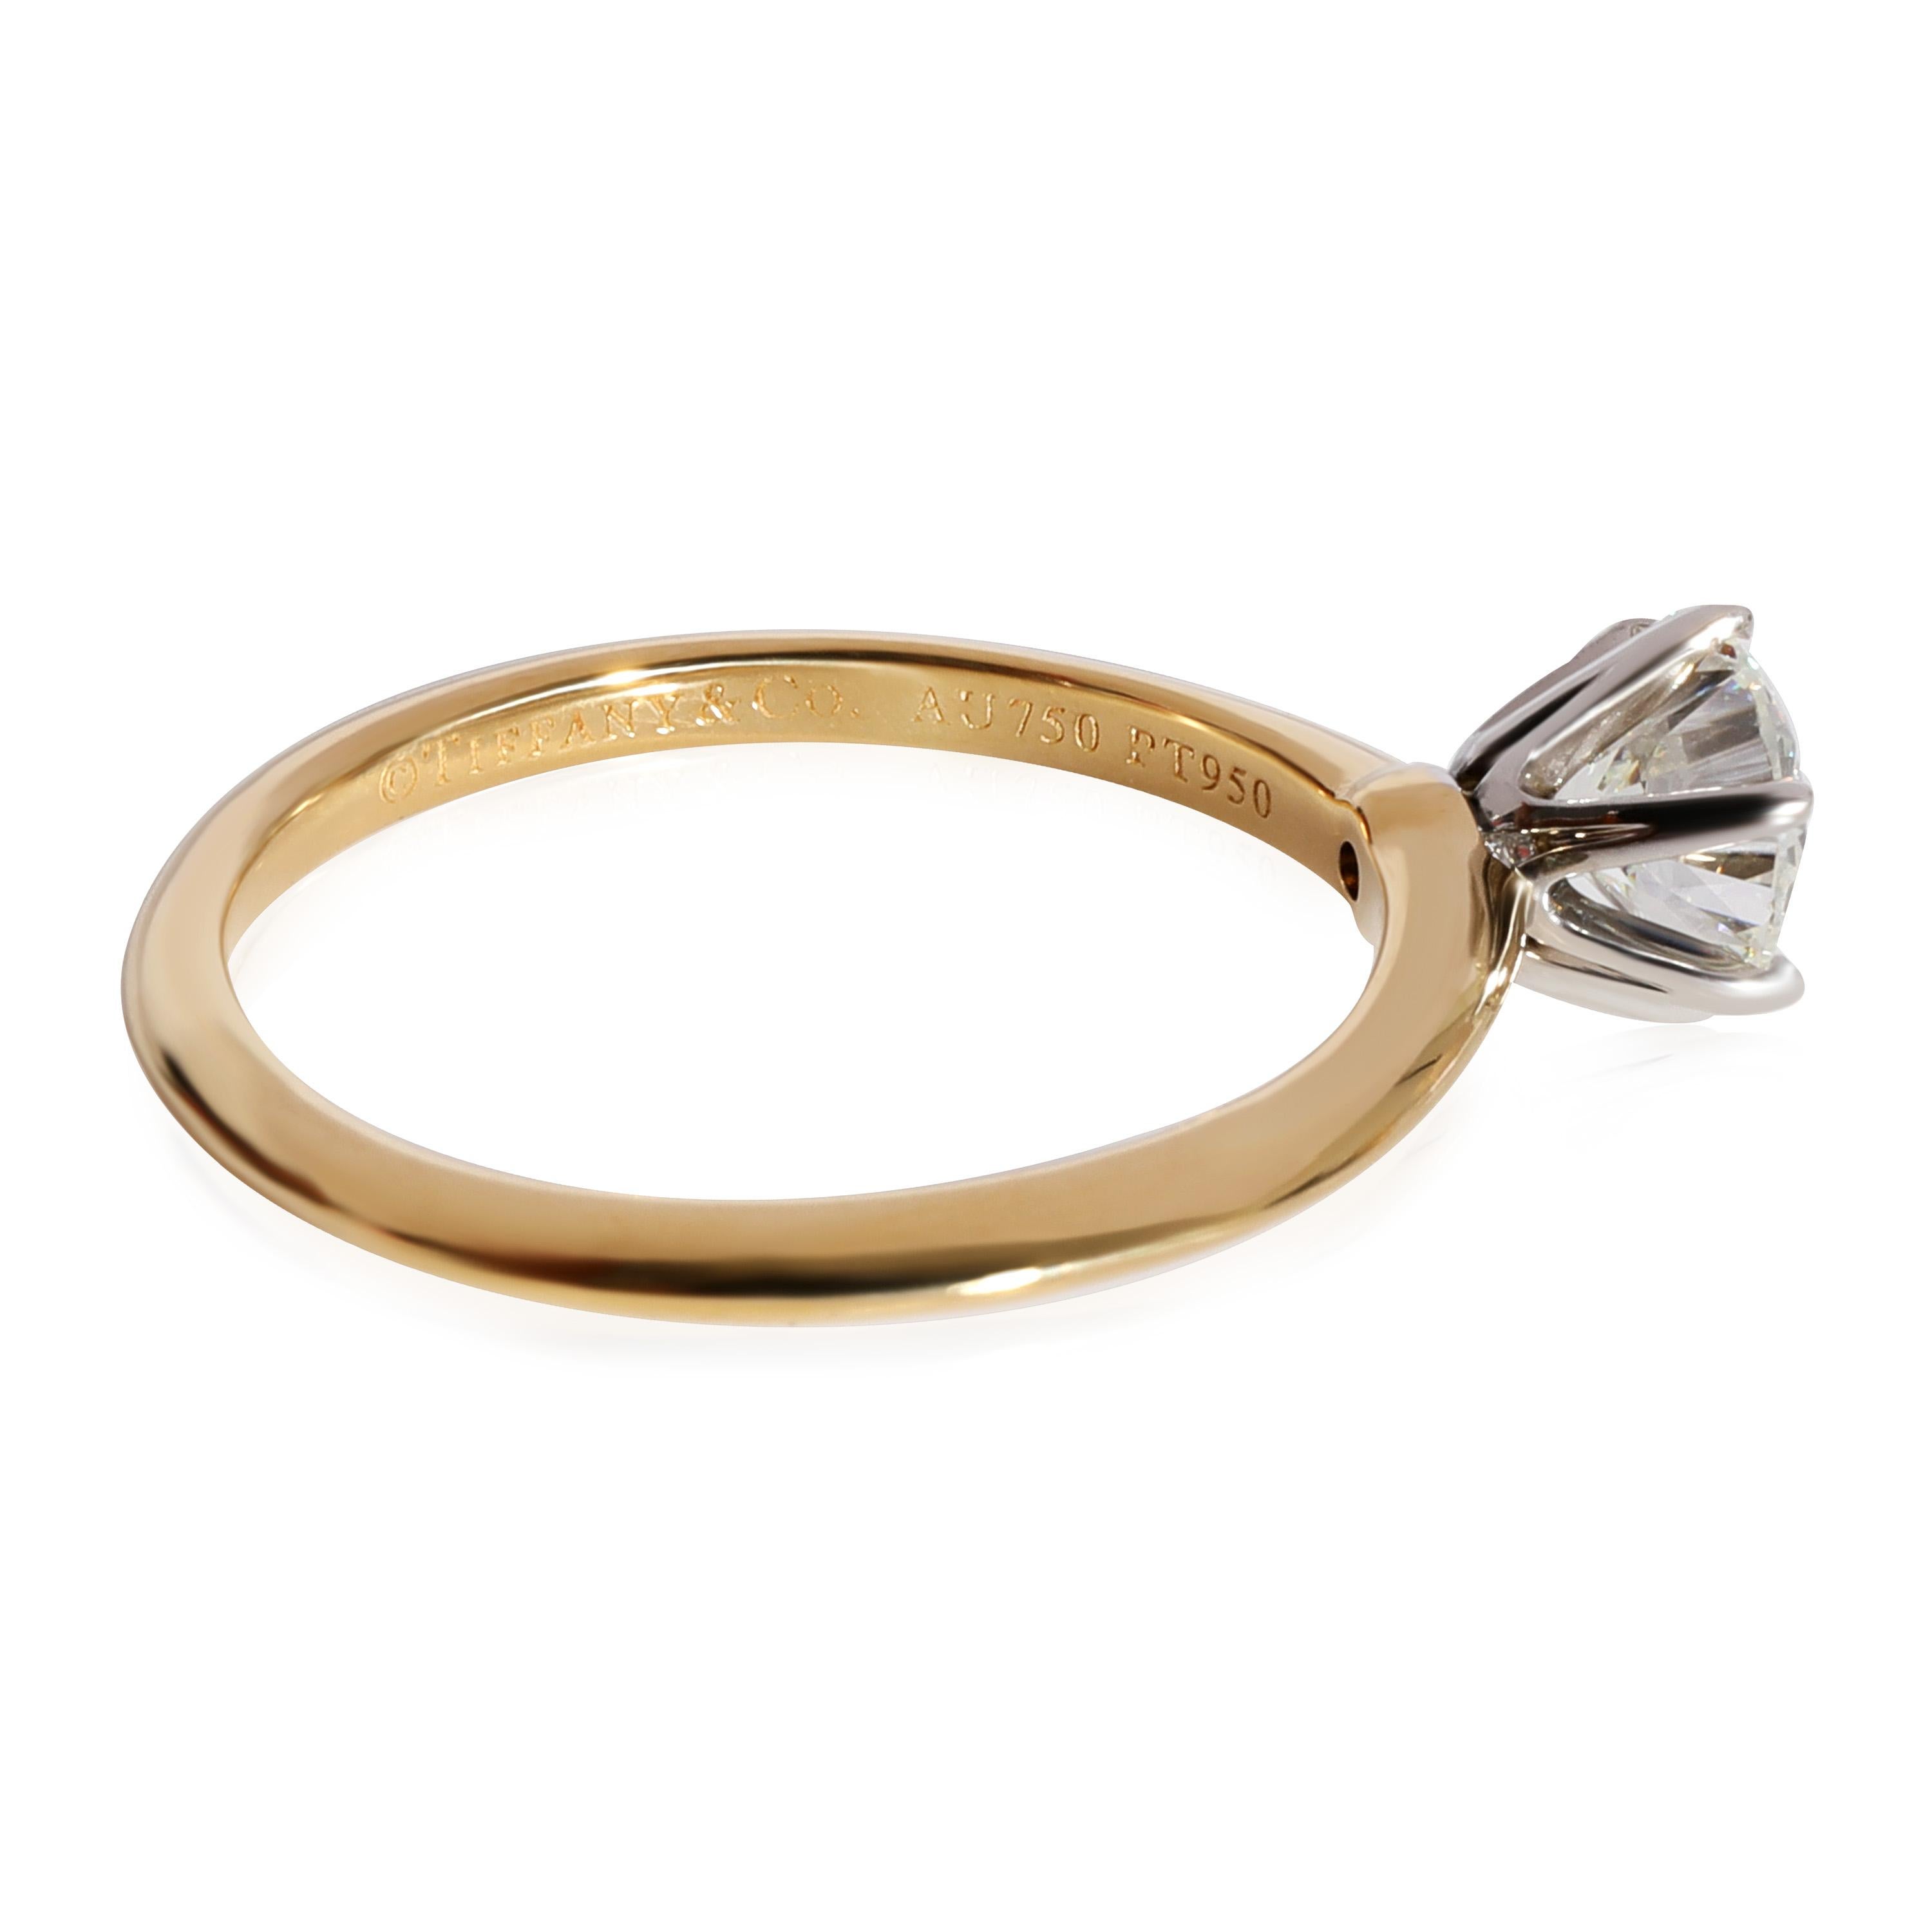 Women's Tiffany & Co. The Tiffany Solitaire Ring in 18K Yellow Gold/Plat 1.05 CTW